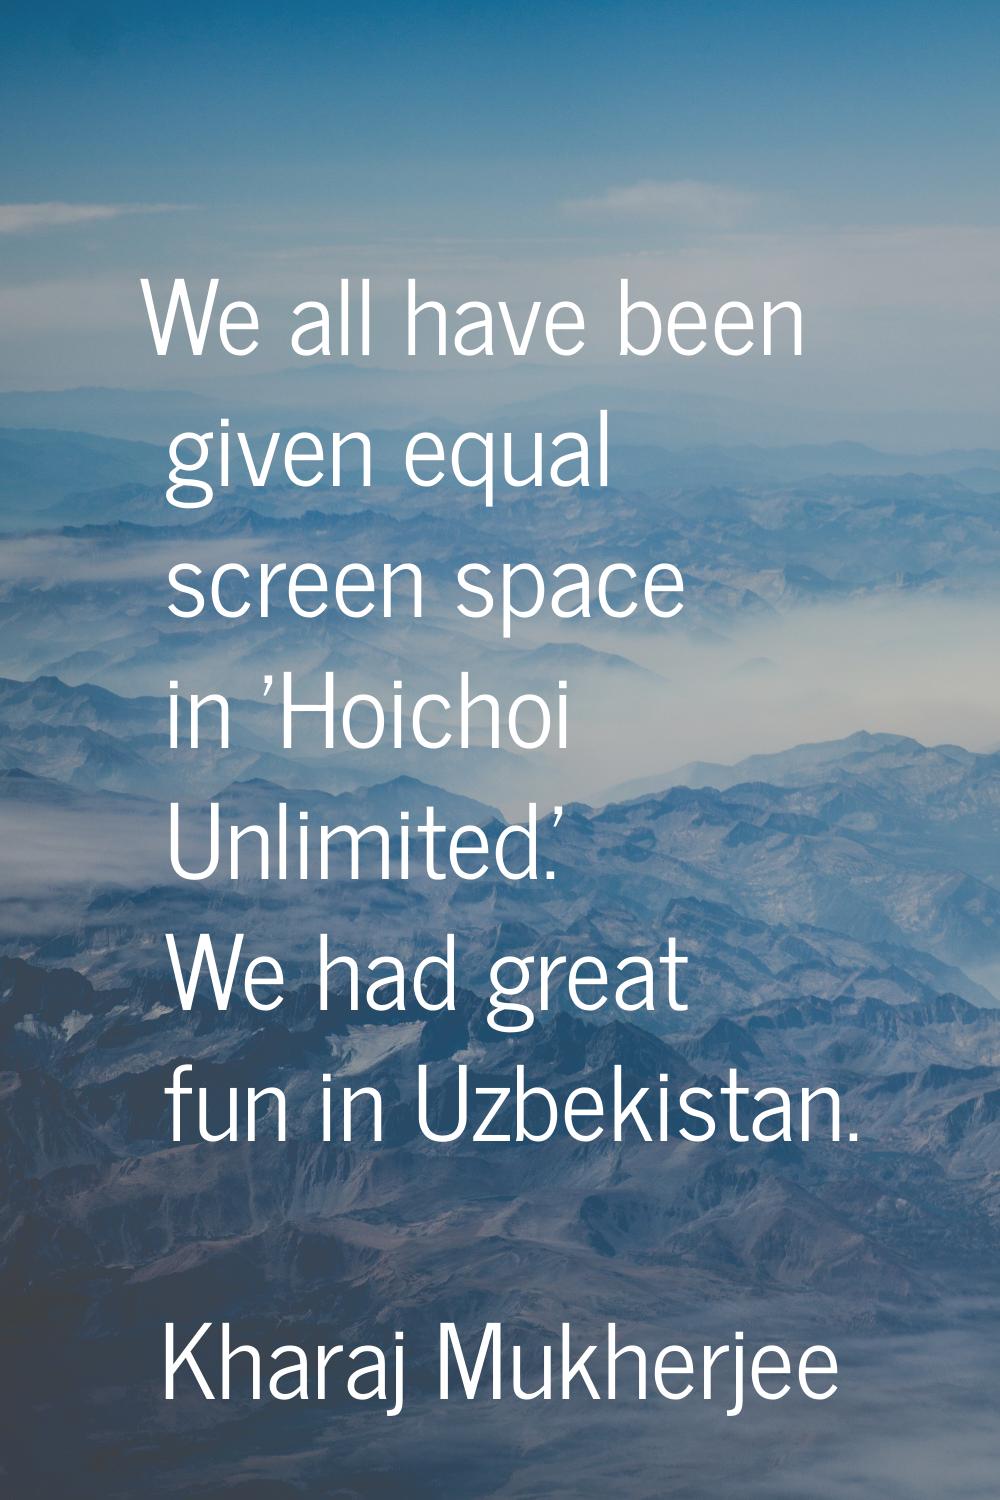 We all have been given equal screen space in 'Hoichoi Unlimited.' We had great fun in Uzbekistan.